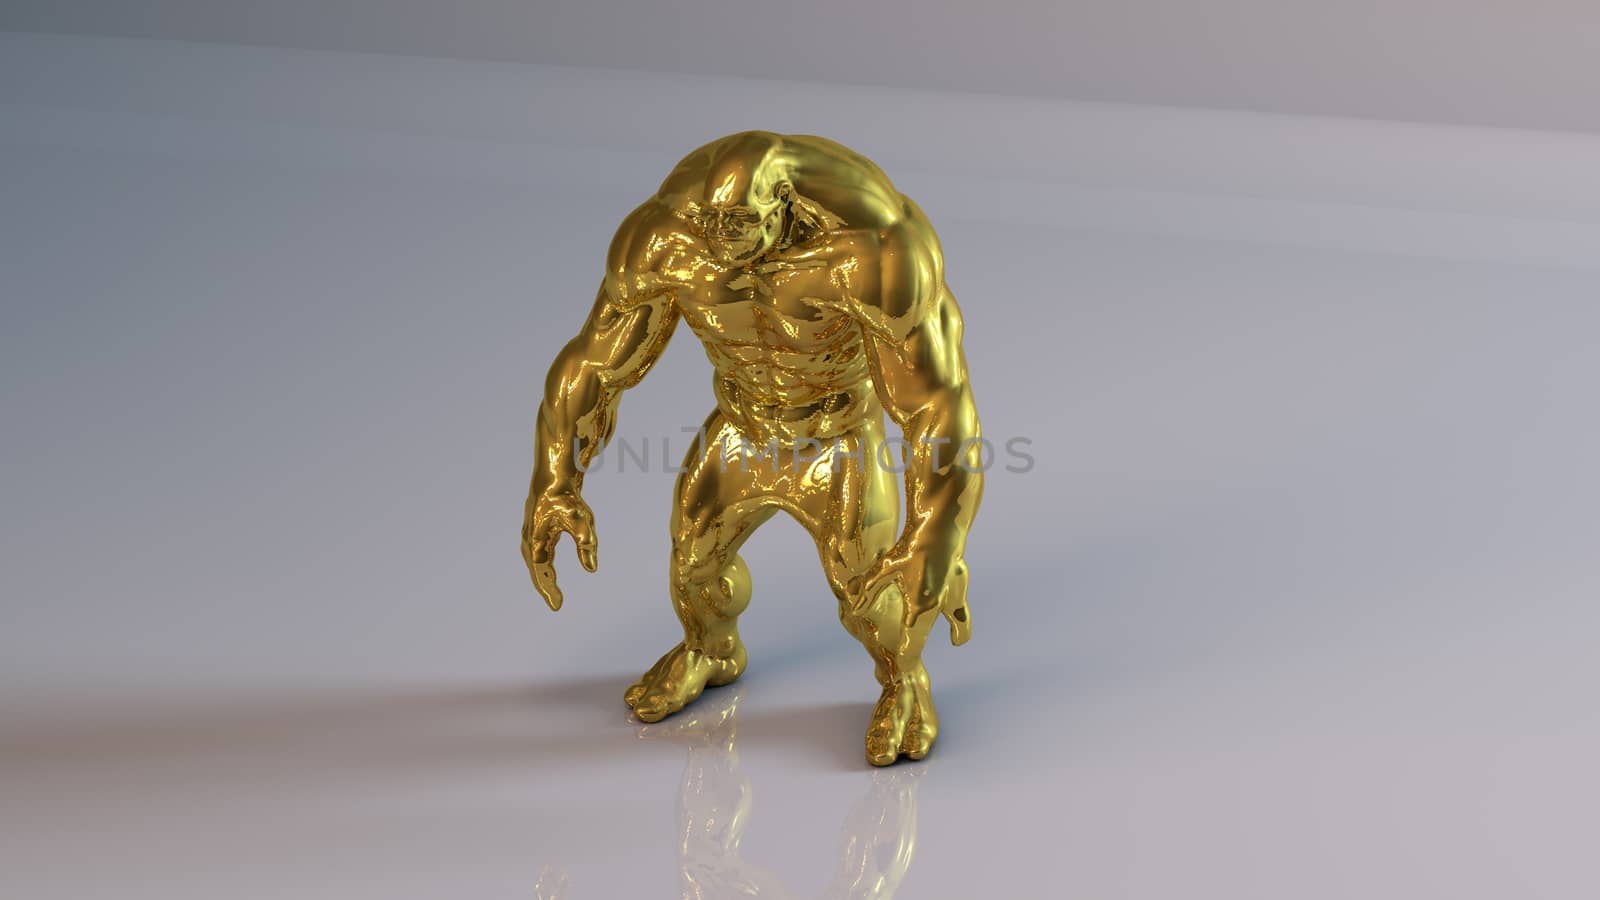 Golden 3D object (Muscle man) inside a white reflected stage with high render quality to be used as a logo, medal, symbol, shape, emblem, icon, business, geometric, label or any other use